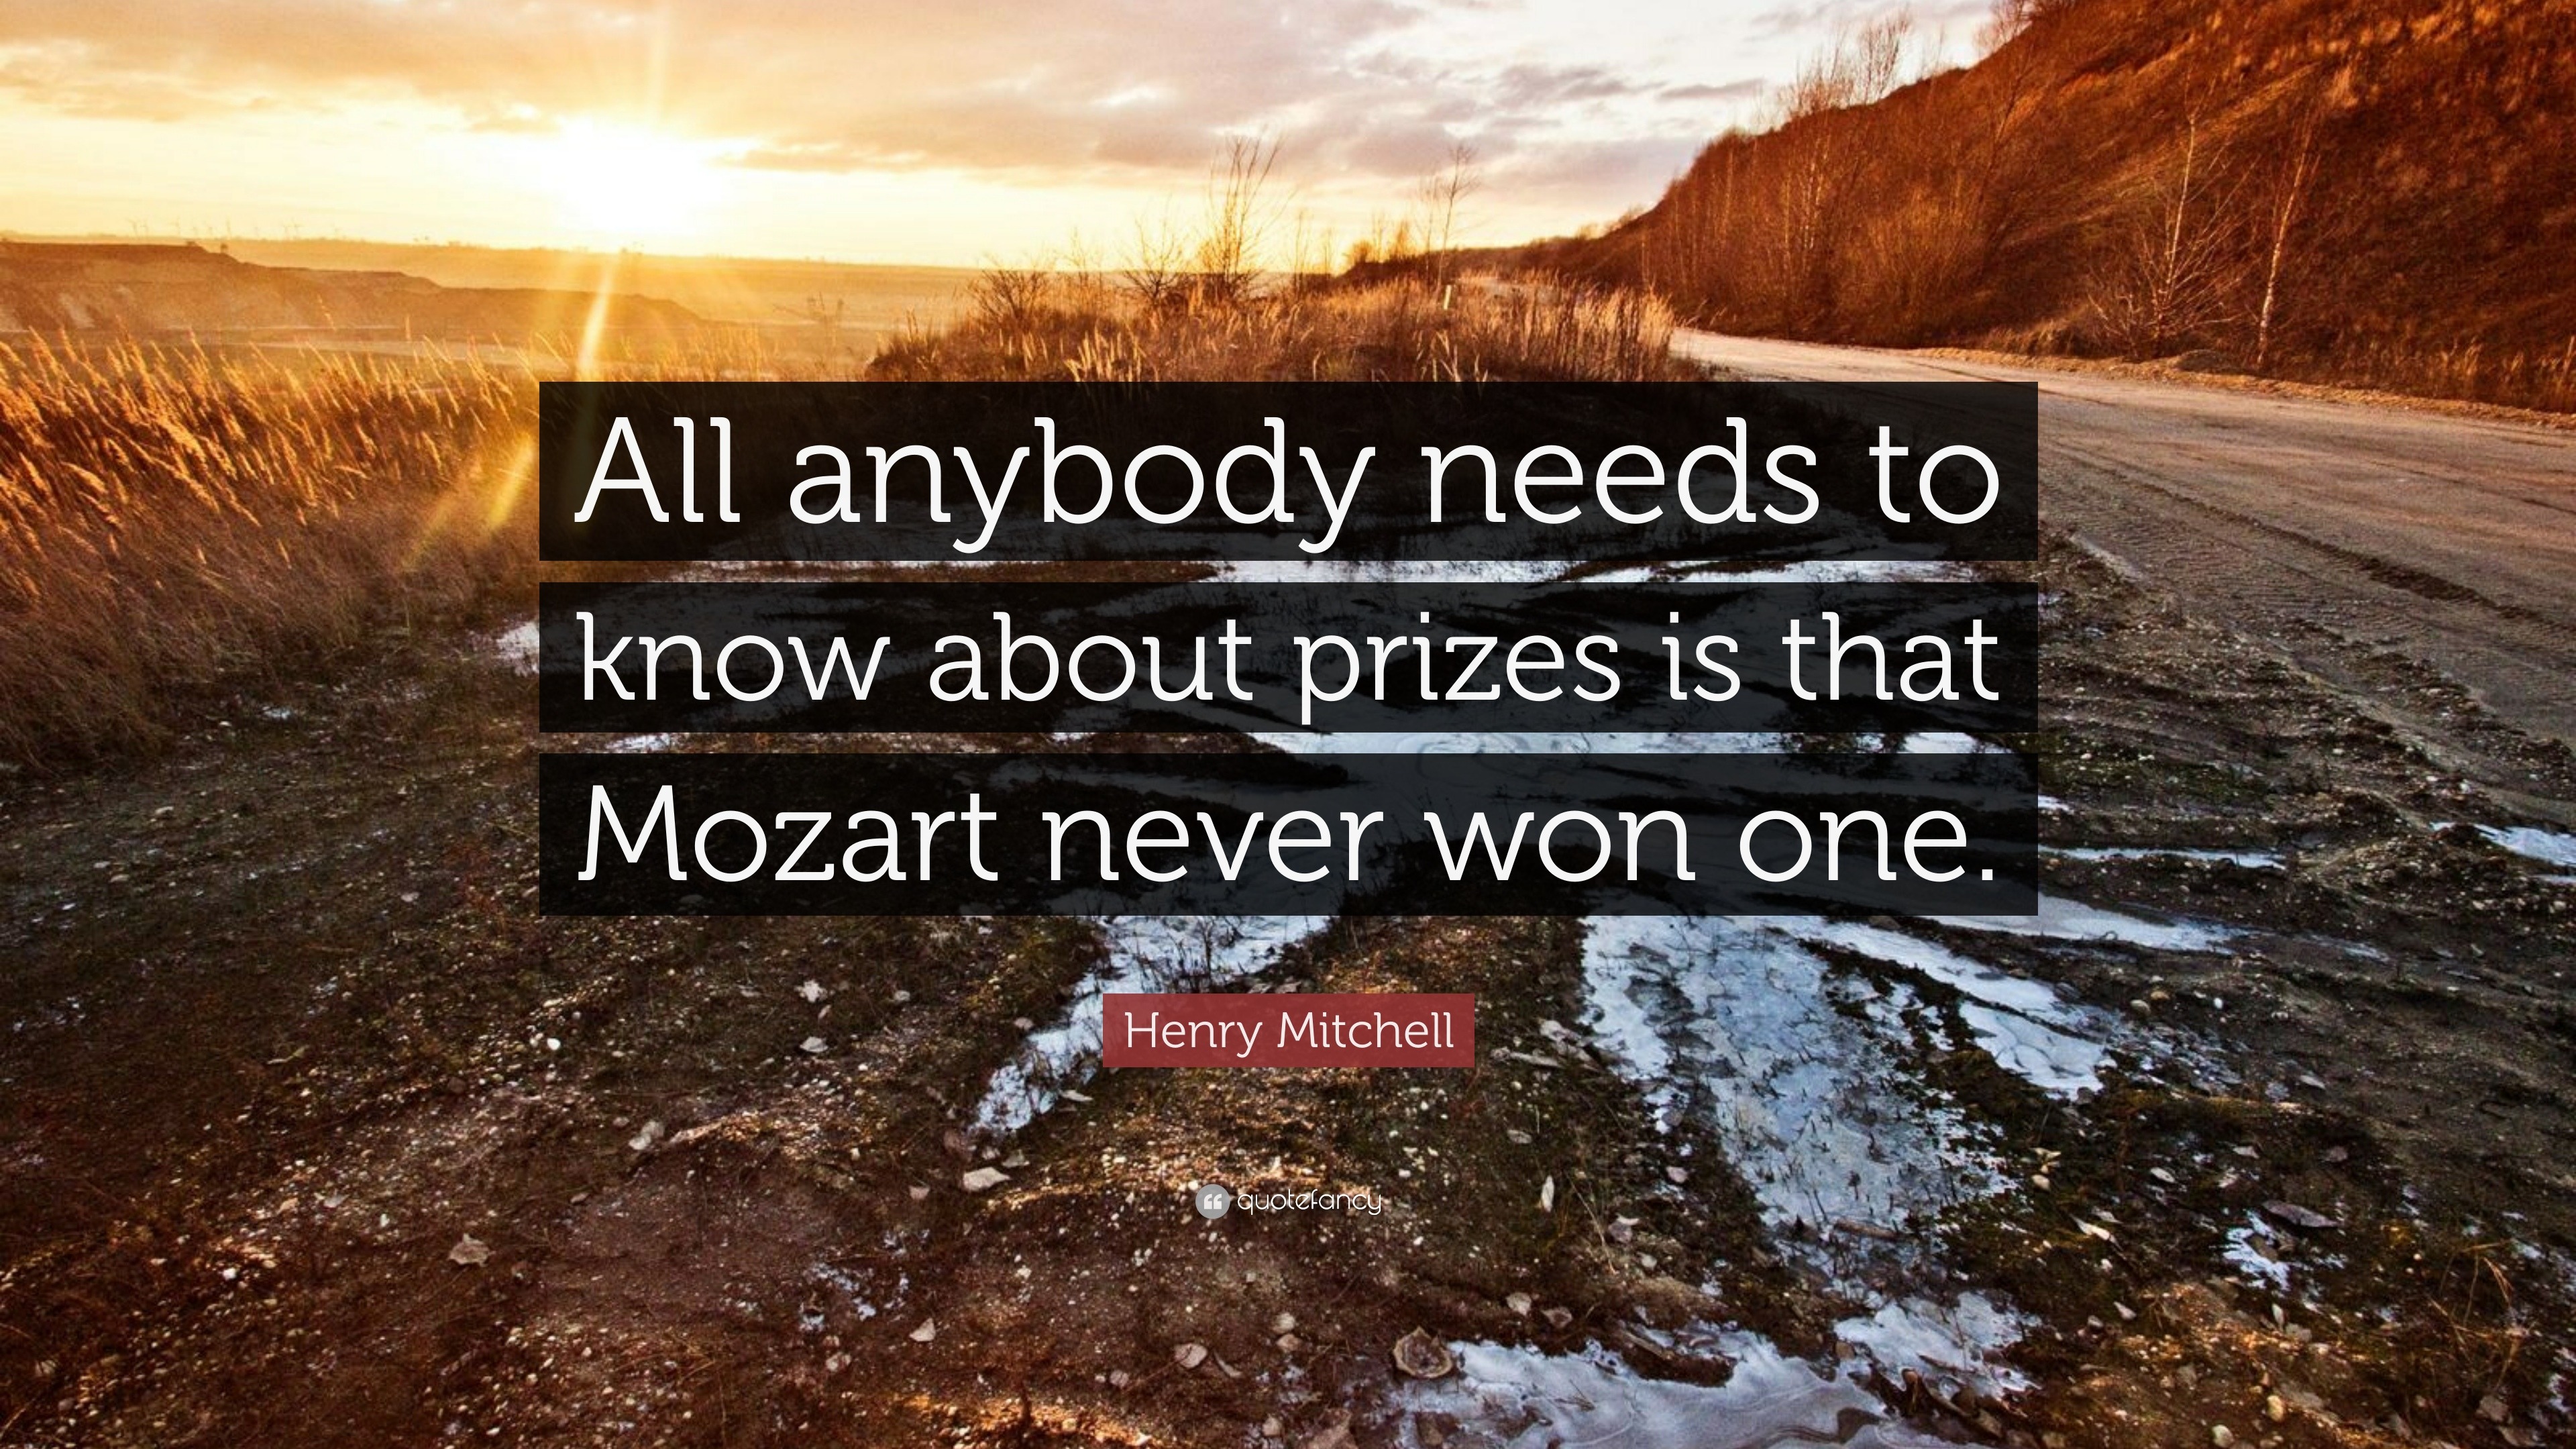 Henry Mitchell Quote: “All anybody needs to know about prizes is that ...